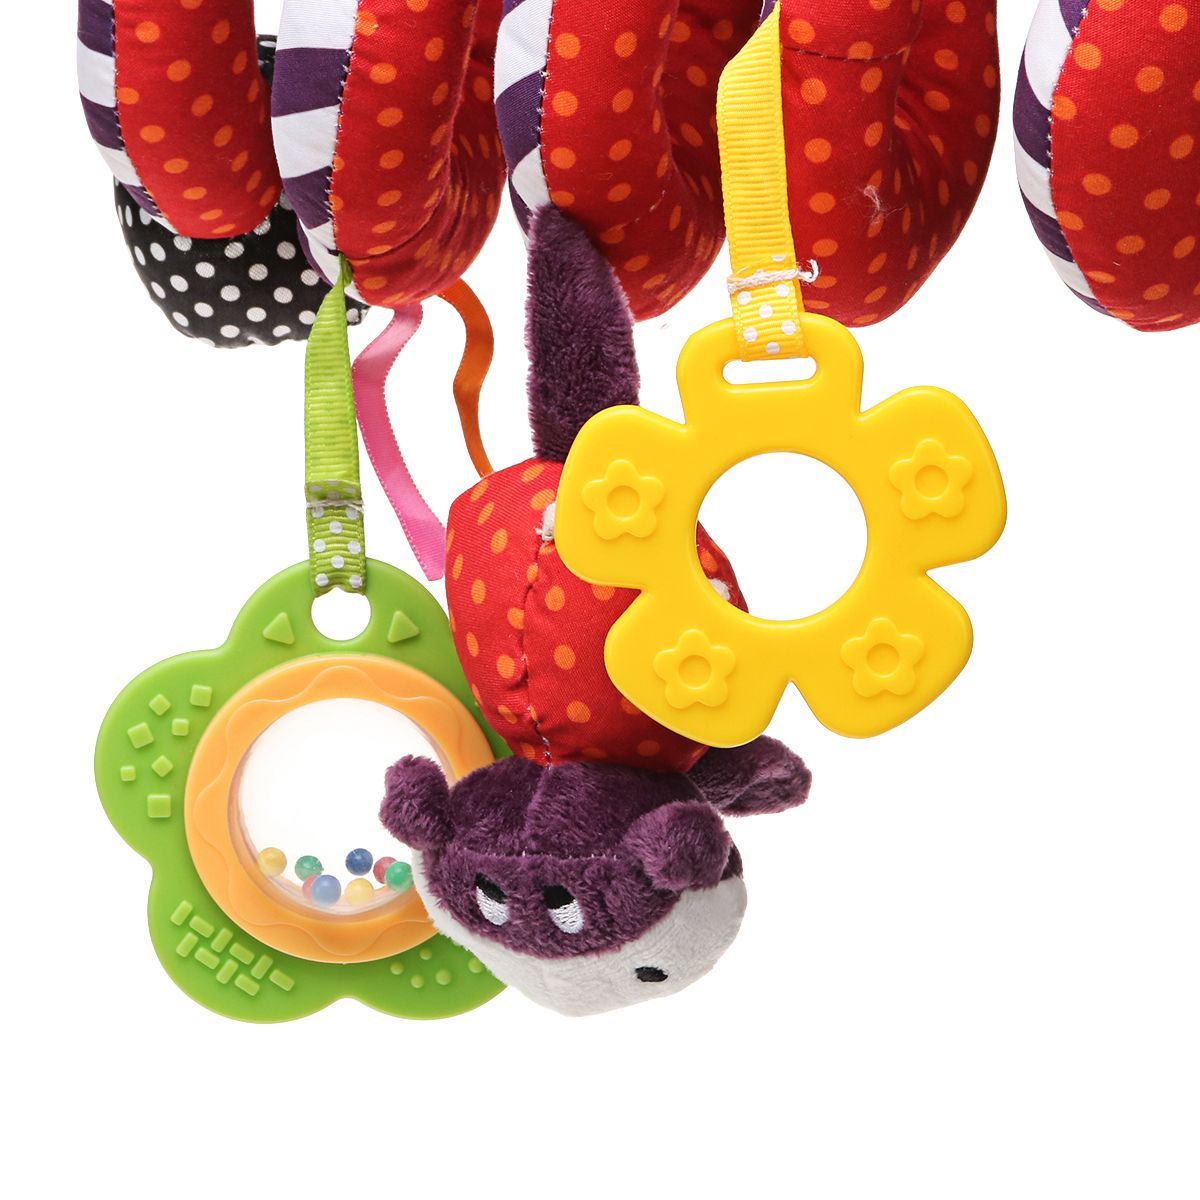 Infant-Bed-Hanging-Baby-Stroller-Rattle-Crib-Plush-Spiral-Roll-Toy-Decorations-1560137